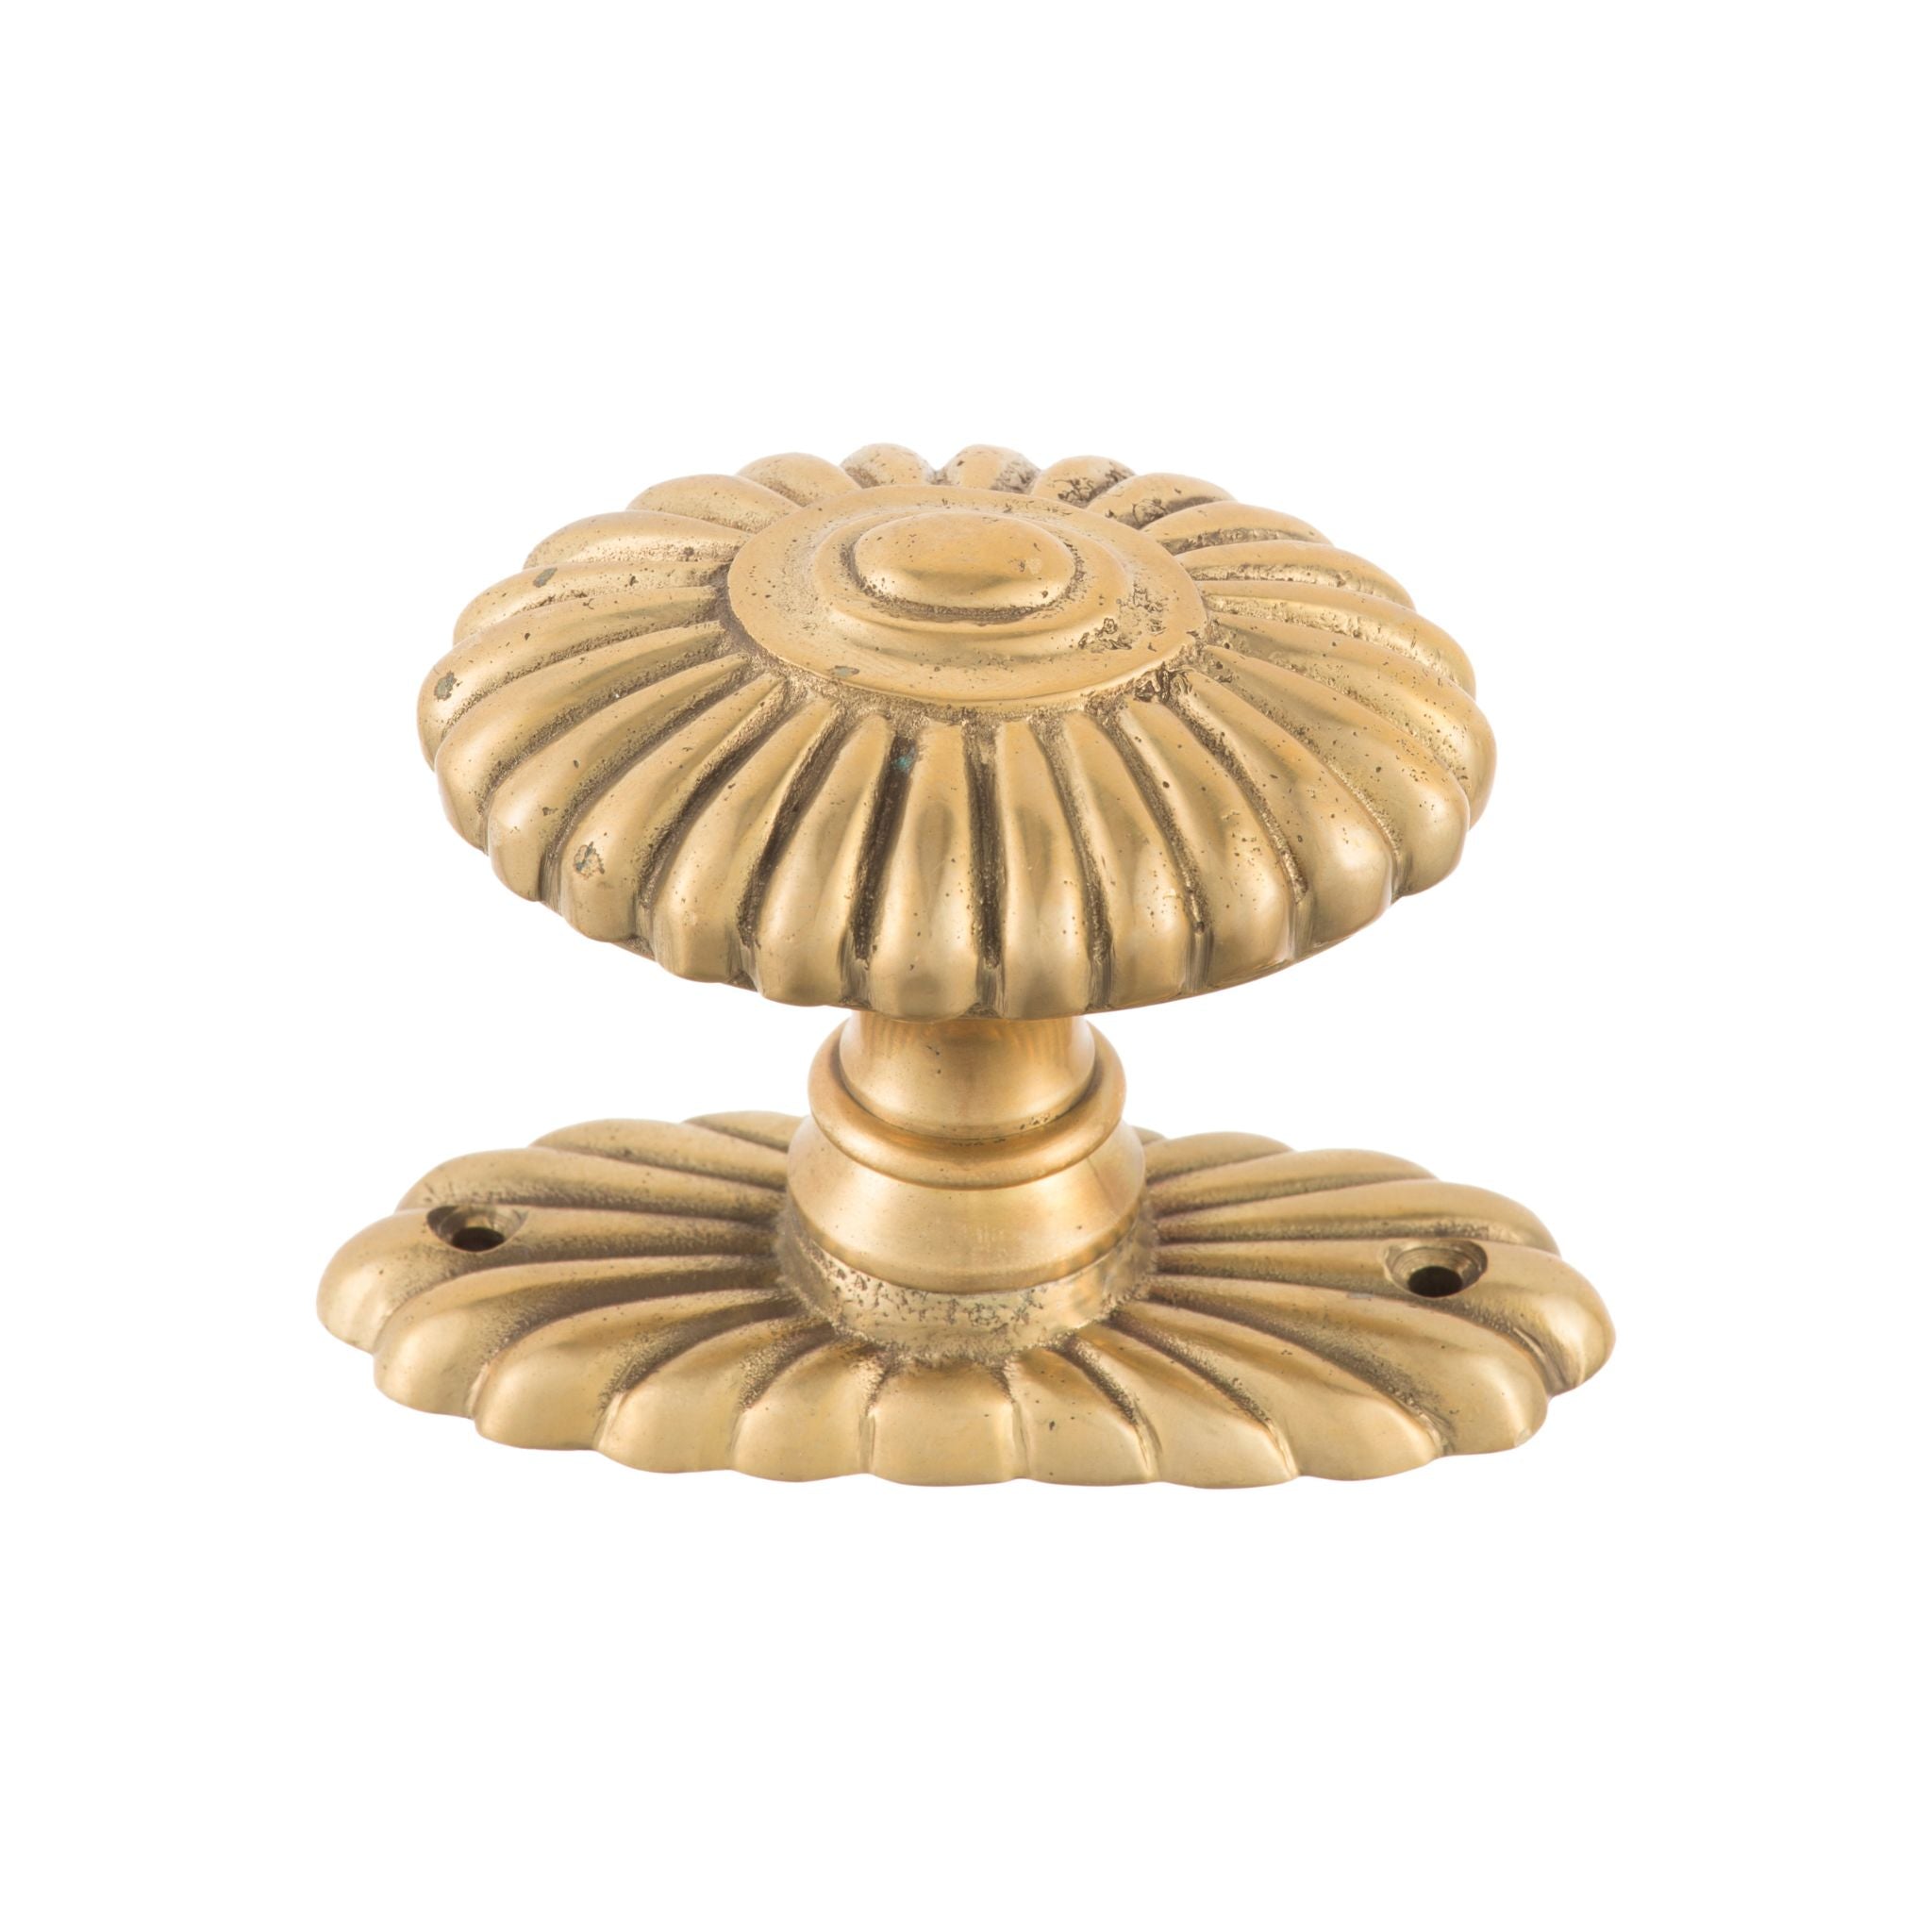 Elegant brass knob with a smooth, polished finish, designed for use on cabinets, drawers, and doors